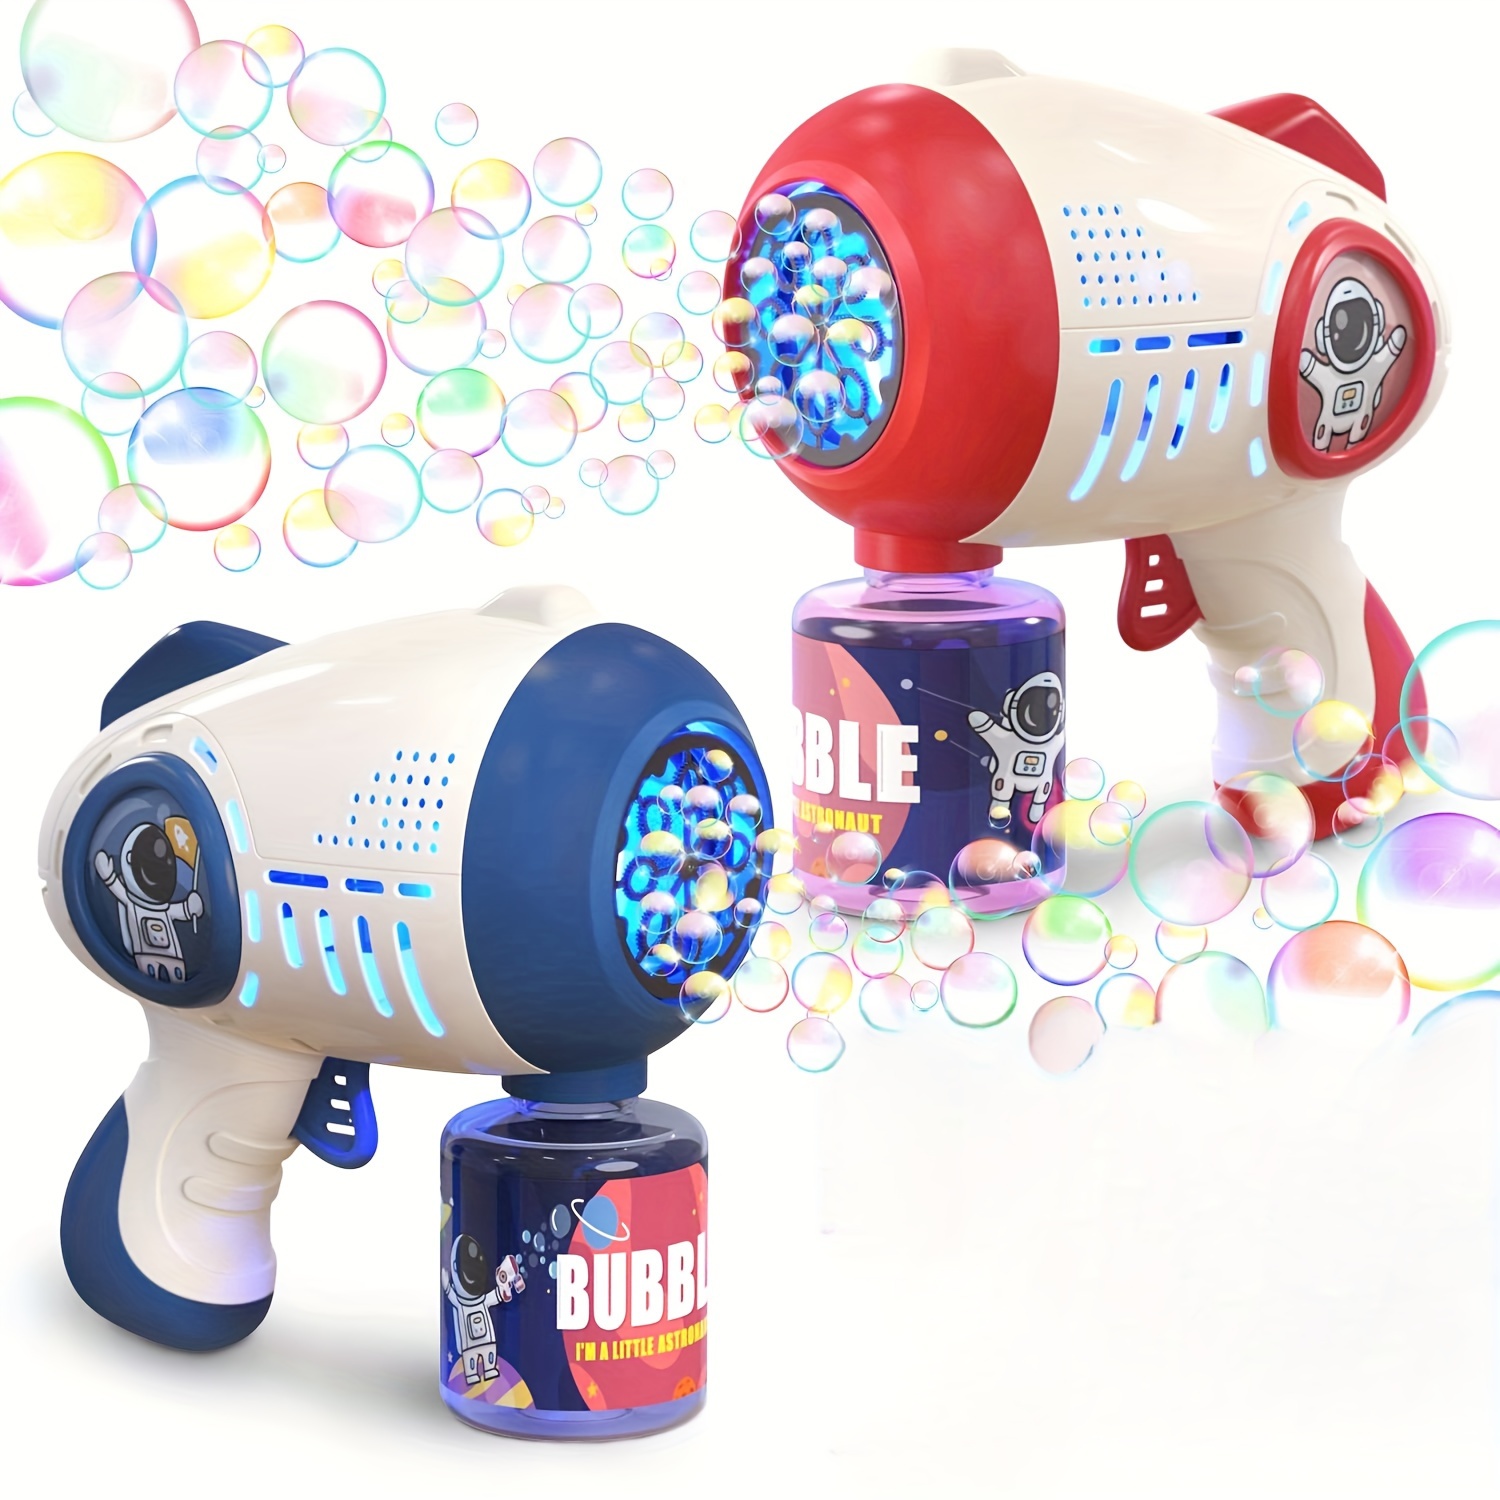 

1 Bubble Guns For Kids Toddlers With 1 Bottles Bubble Solution, 360-degree Leak-proof Design Bubble Blower For Party Favors, Summer Toy, Outdoors Activity (excluding Batteries)